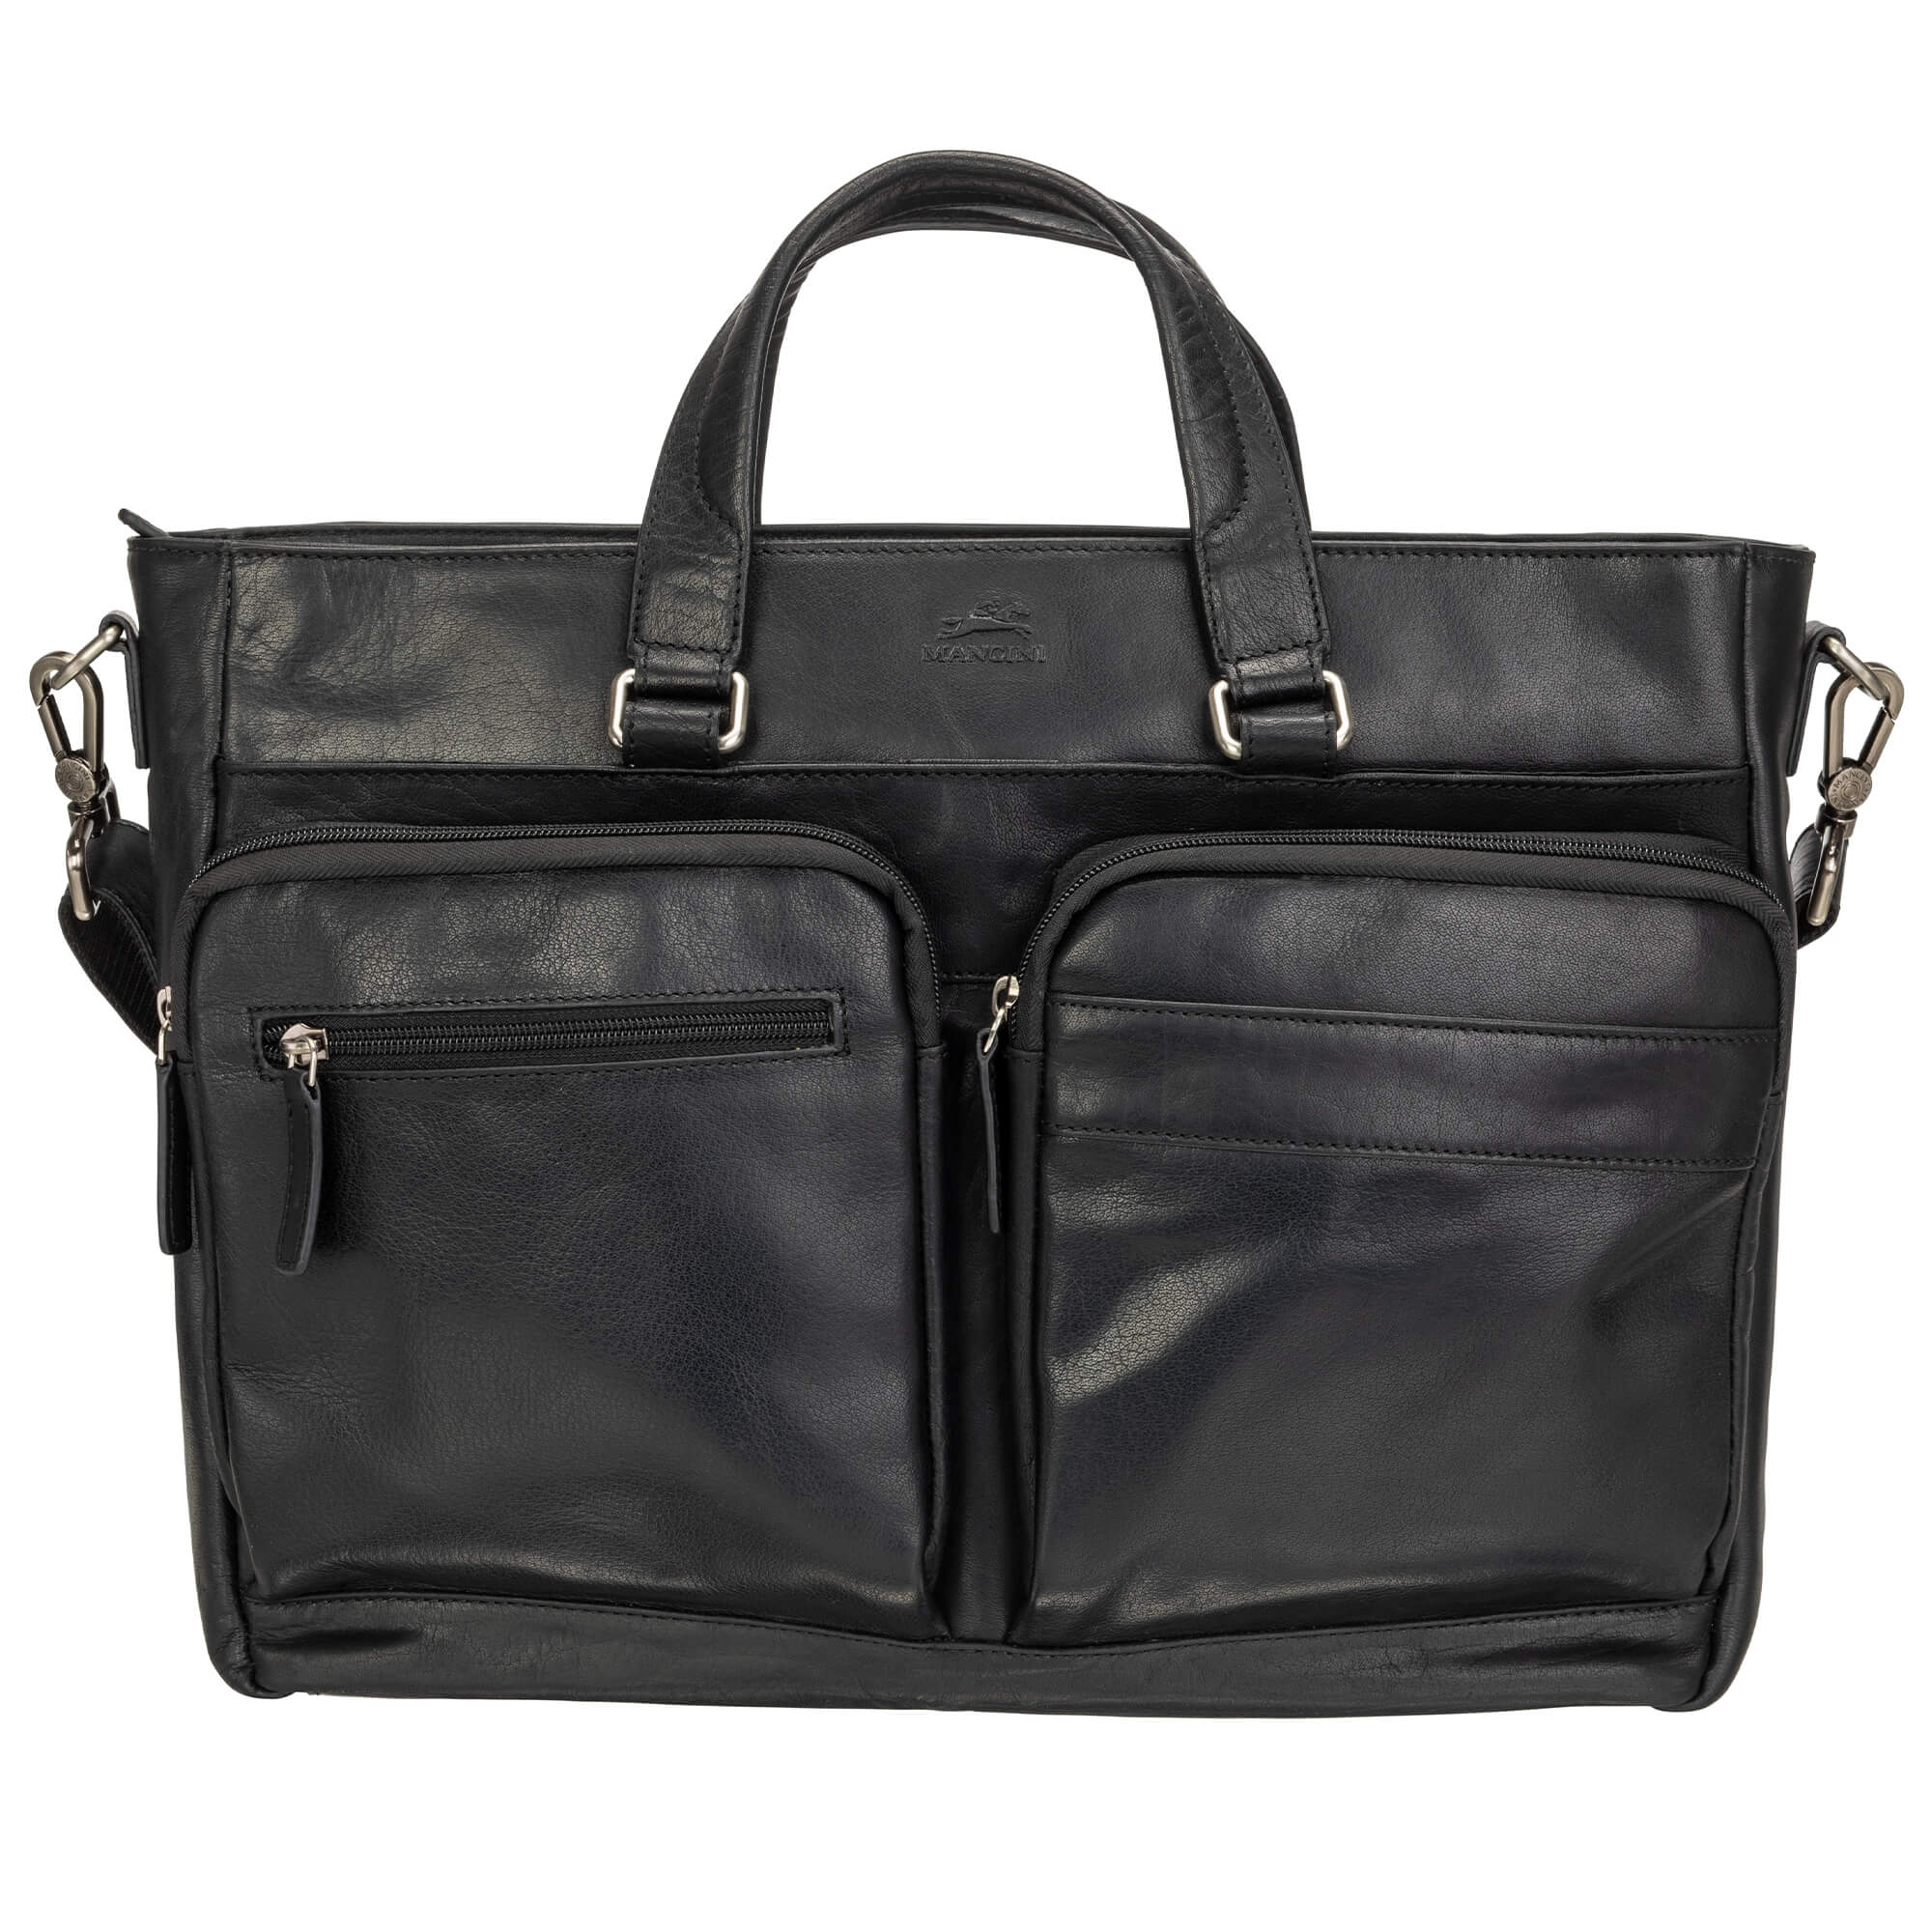 Leather Products on Sale - Mancini Leather